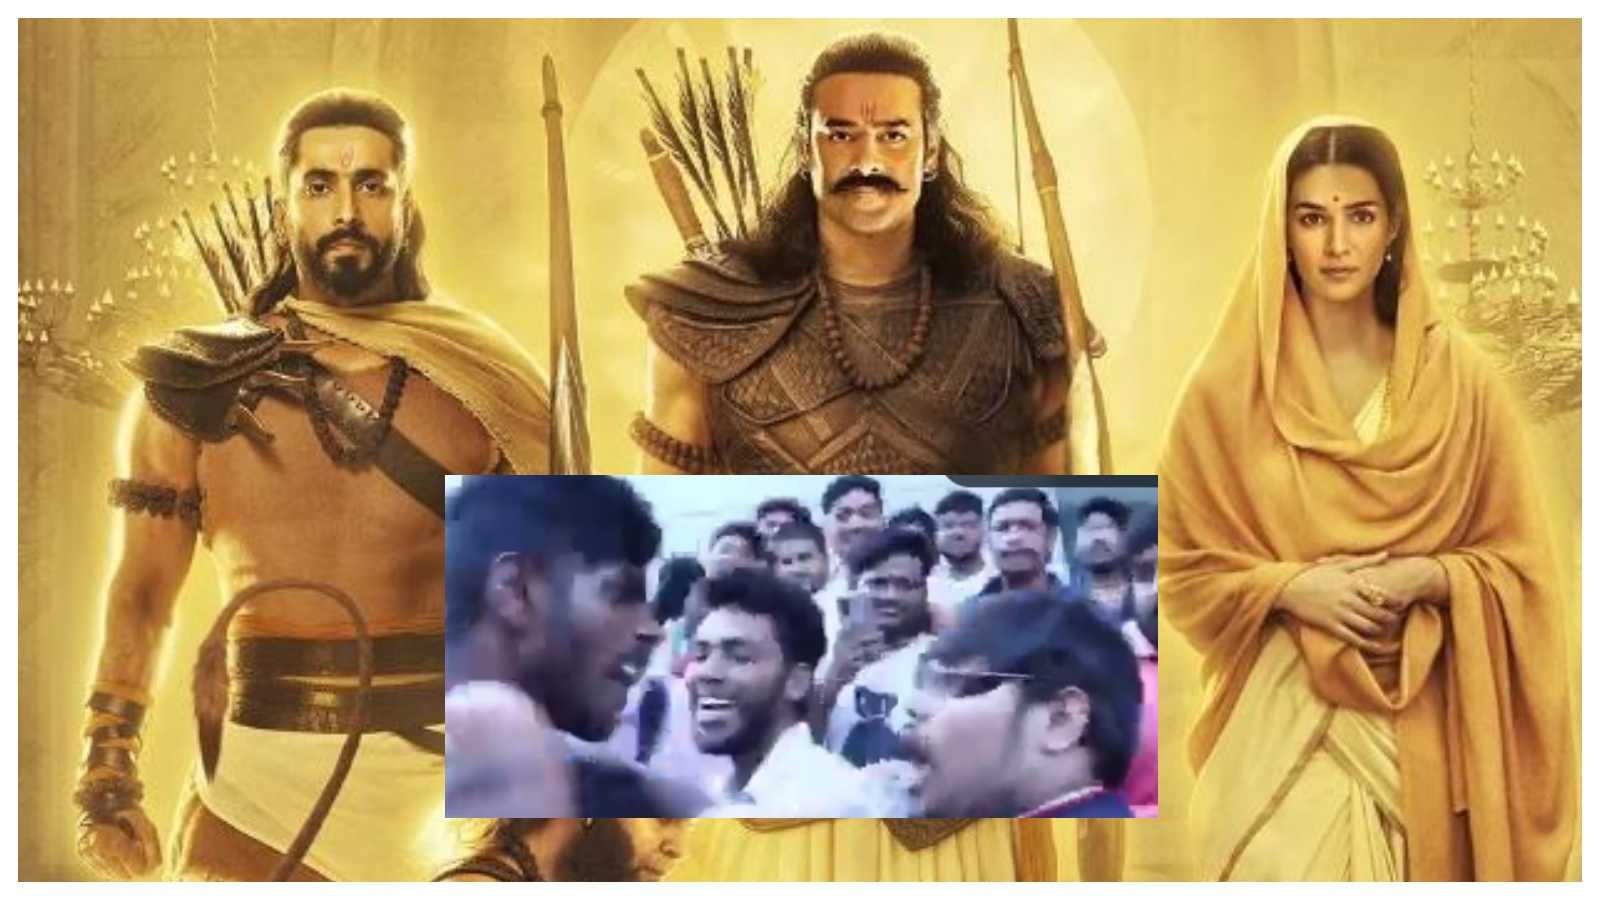 Adipurush: Prabhas' fans beat a man criticising actor's role as Lord Ram in Om Raut's directorial